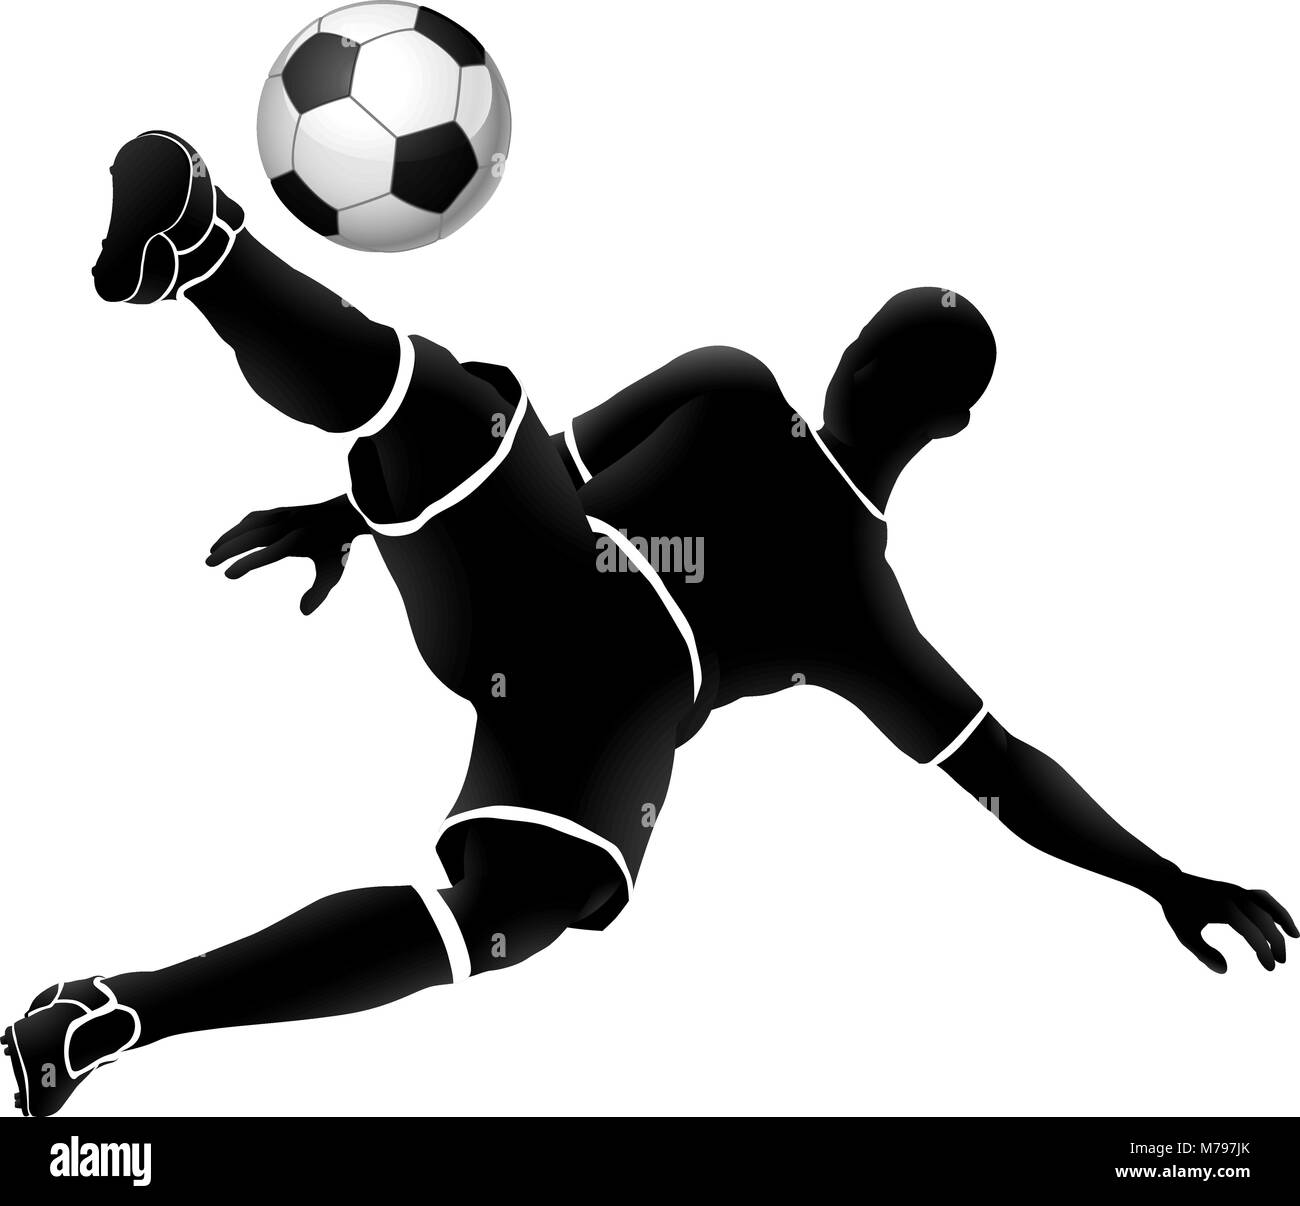 Soccer Player Football Sports Silhouette Stock Vector